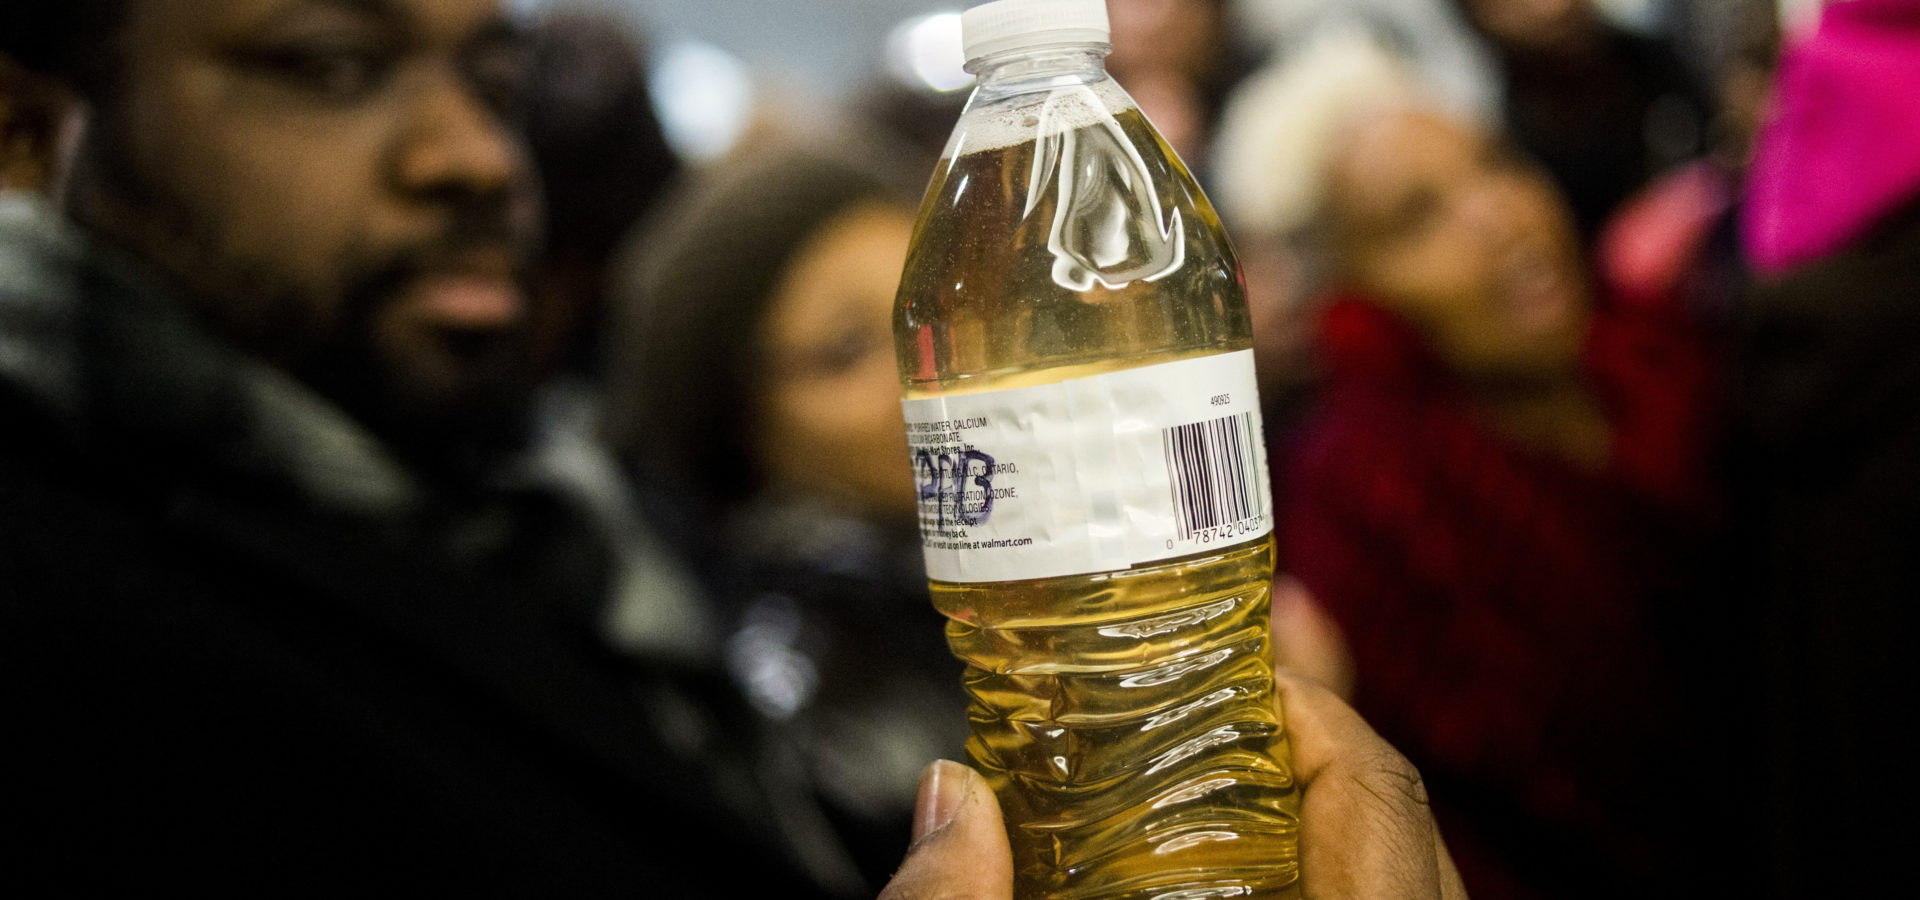 Pastor David Bullock holds up a bottle of Flint water as Michigan State Police hold a barrier to keep protestors out of the Romney Building, where Gov. Rick Snyder's office resides on Thursday, Jan. 14, 2016, in Lansing, Mich. (Jake May/The Flint Journal-MLive.com via AP)